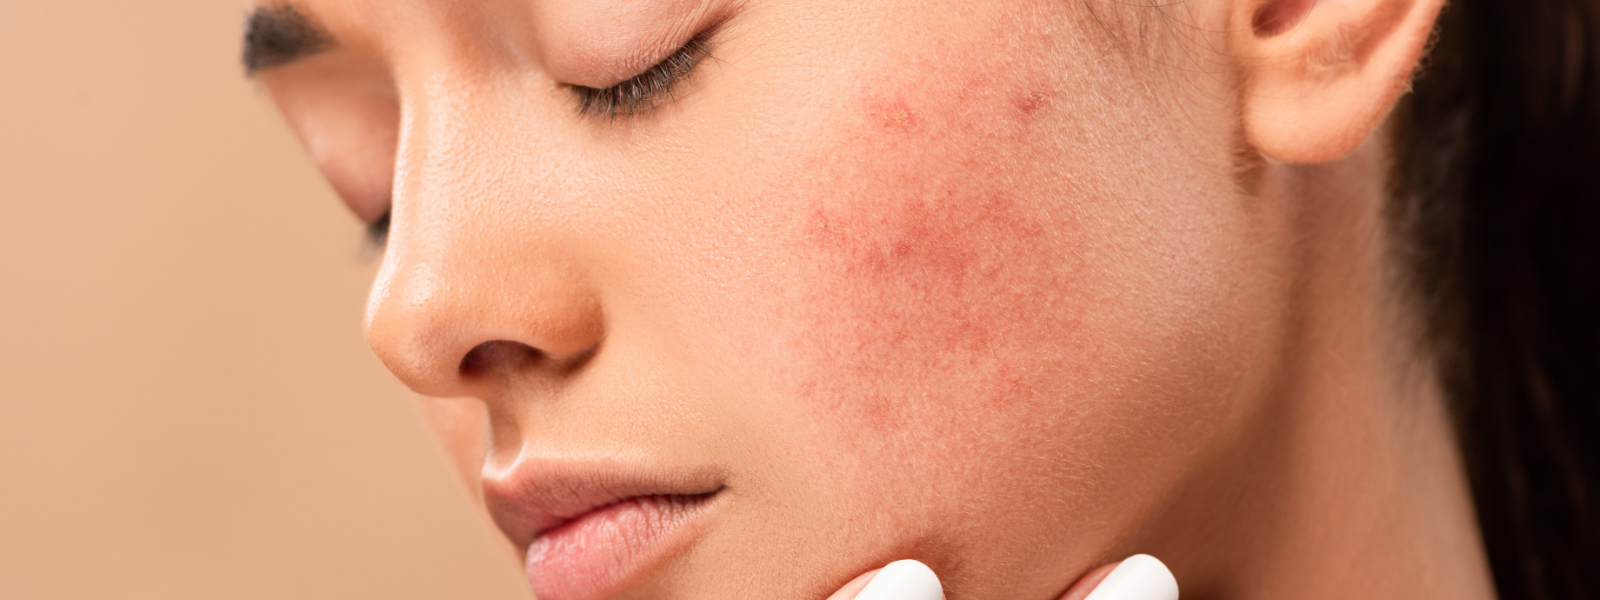 Acne and Acne Scarring